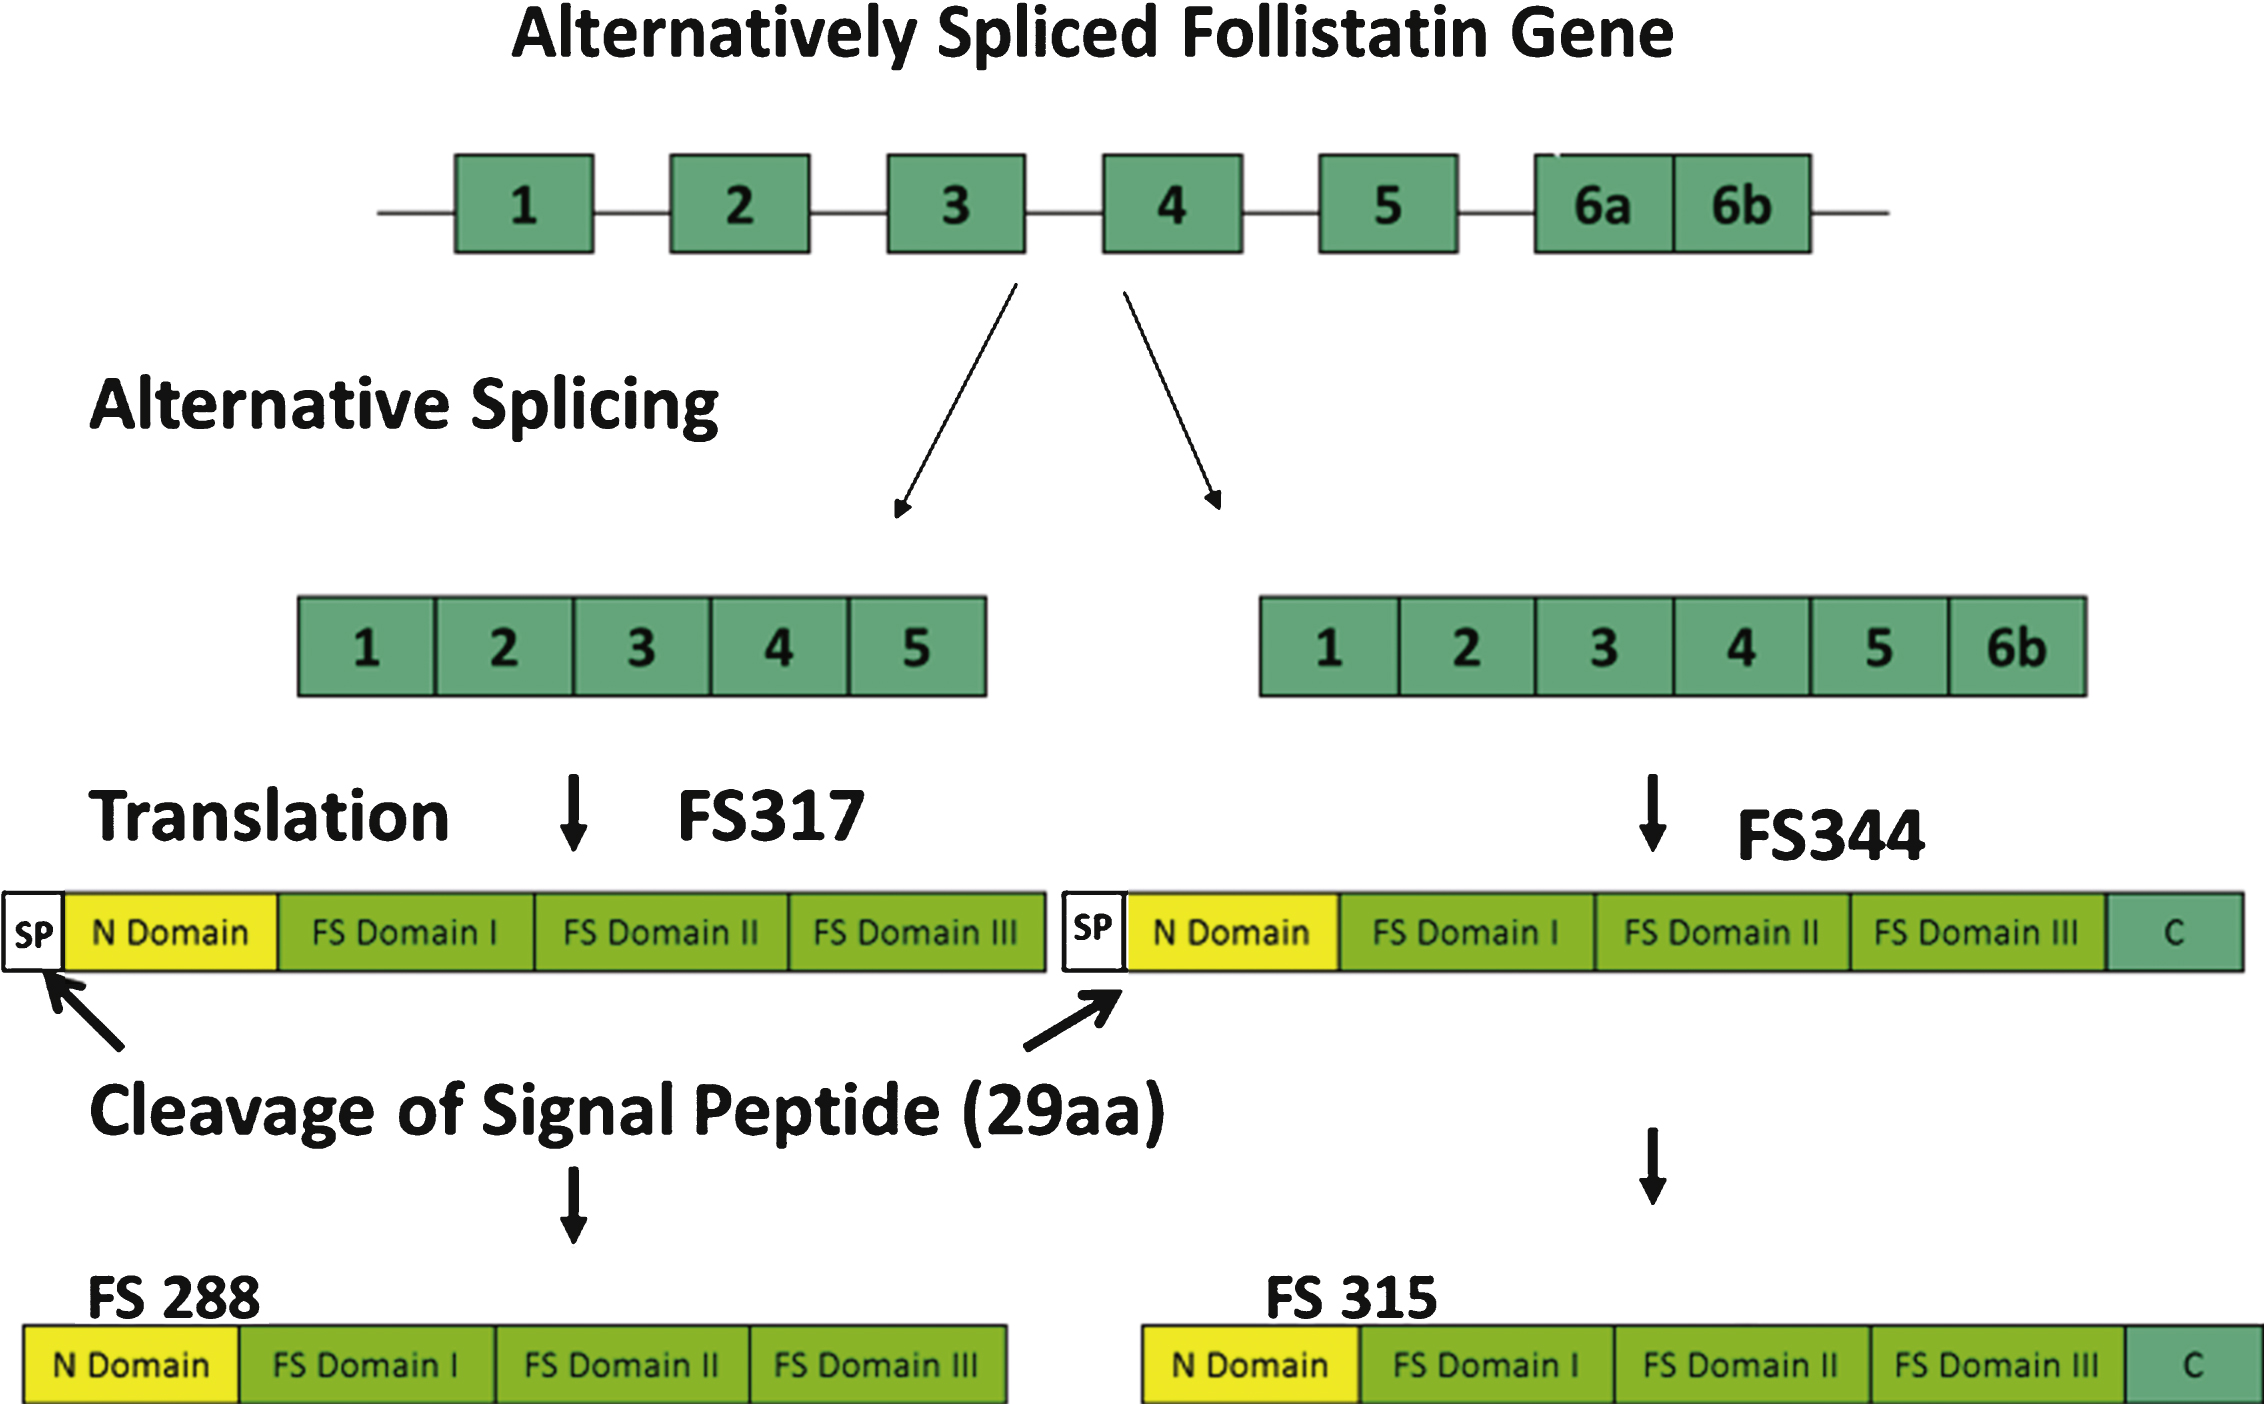 Alternative splicing of the follistatin gene produces two isoforms, FS317 and FS344. Alternative splicing occurs at the 3’ end of the gene between exon 5 and exon 6. Splicing out of intron 5 generates a stop codon immediately following the last amino acid of exon 5, and leads to the termination of the coding sequence for FS317. An alternative splice site results in the inclusion of exon 6 and generates FS344. After translation and prior to activation, follistatin undergoes further posttranslational modification by cleavage of the 29 amino acid signal peptide. This results in polypeptides FS315 (long-isoform from FS344) and FS288 (short-isoform from FS317).